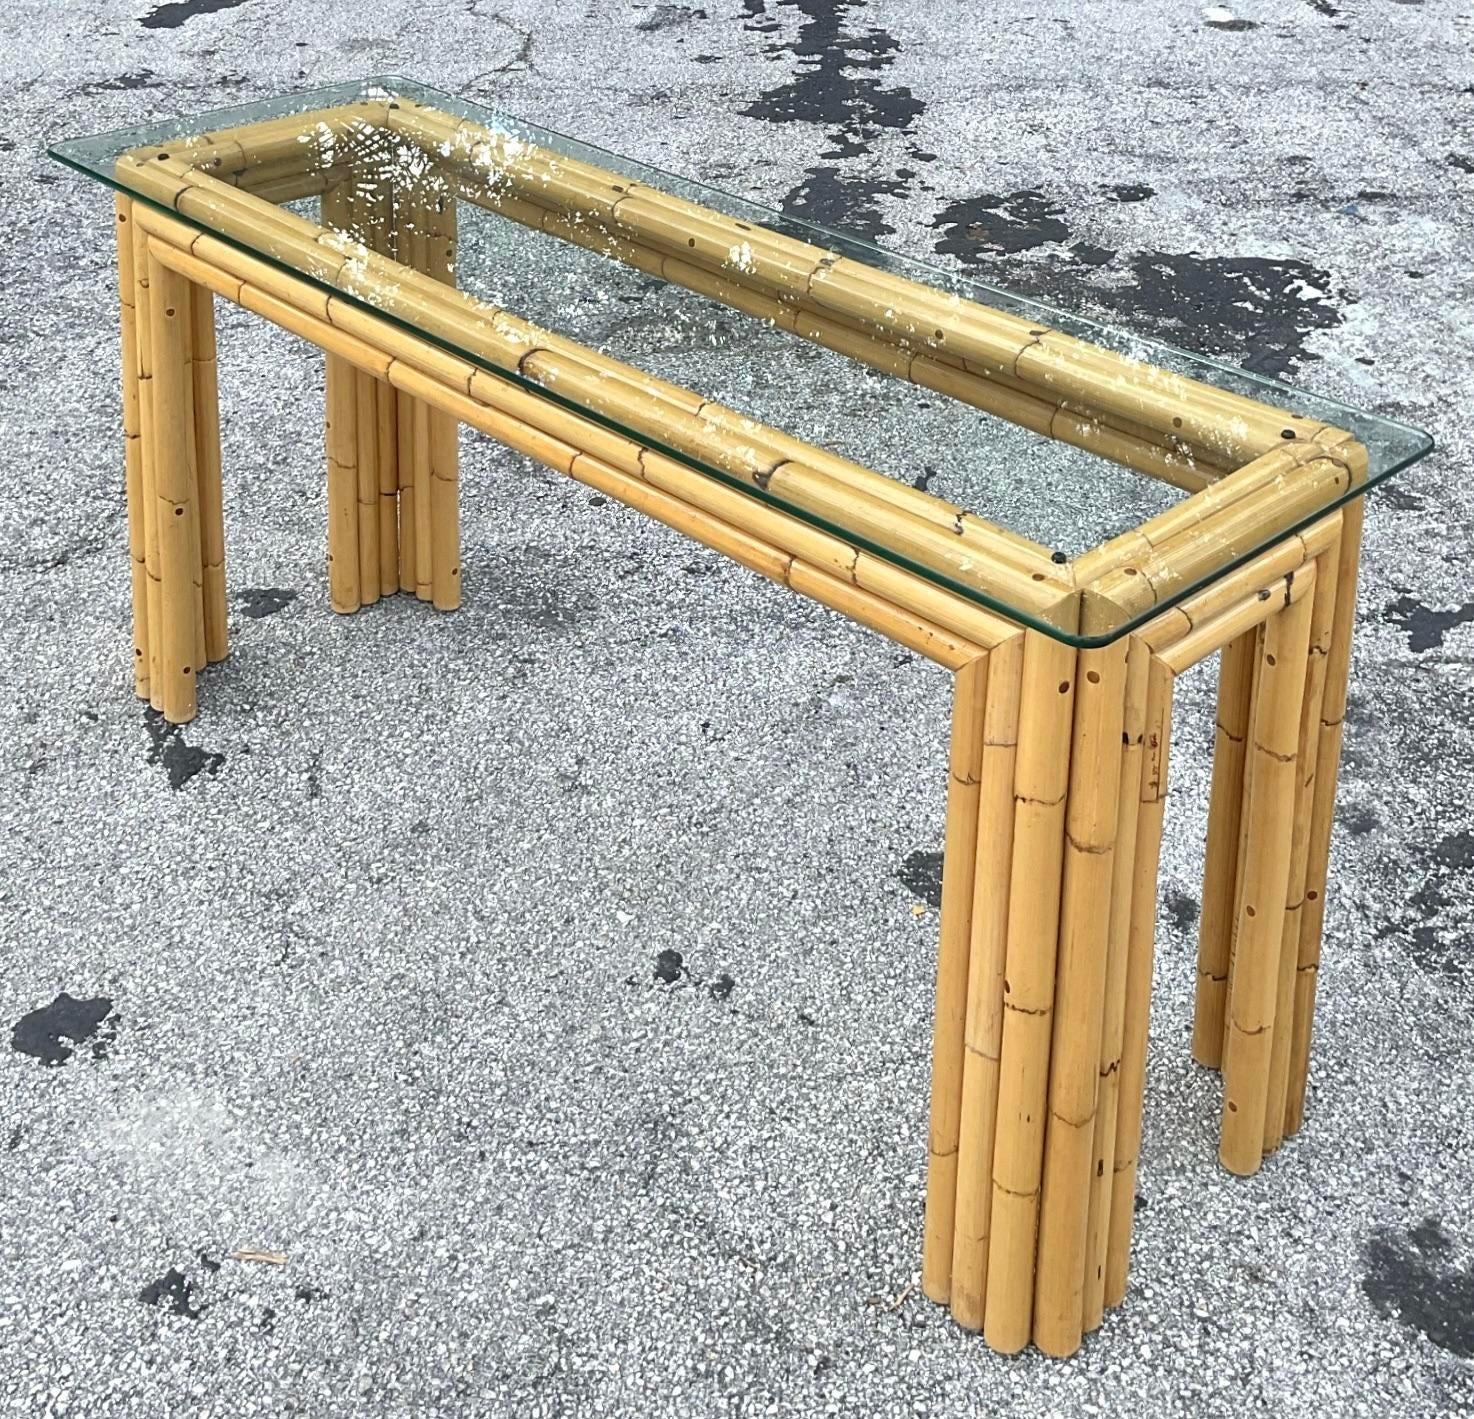 A fantastic vintage Coastal console table. A chic stacked rattan in a clean and linear design. Rare and unusual. Glass top rests on the frame. Acquired from a Palm Beach estate. 